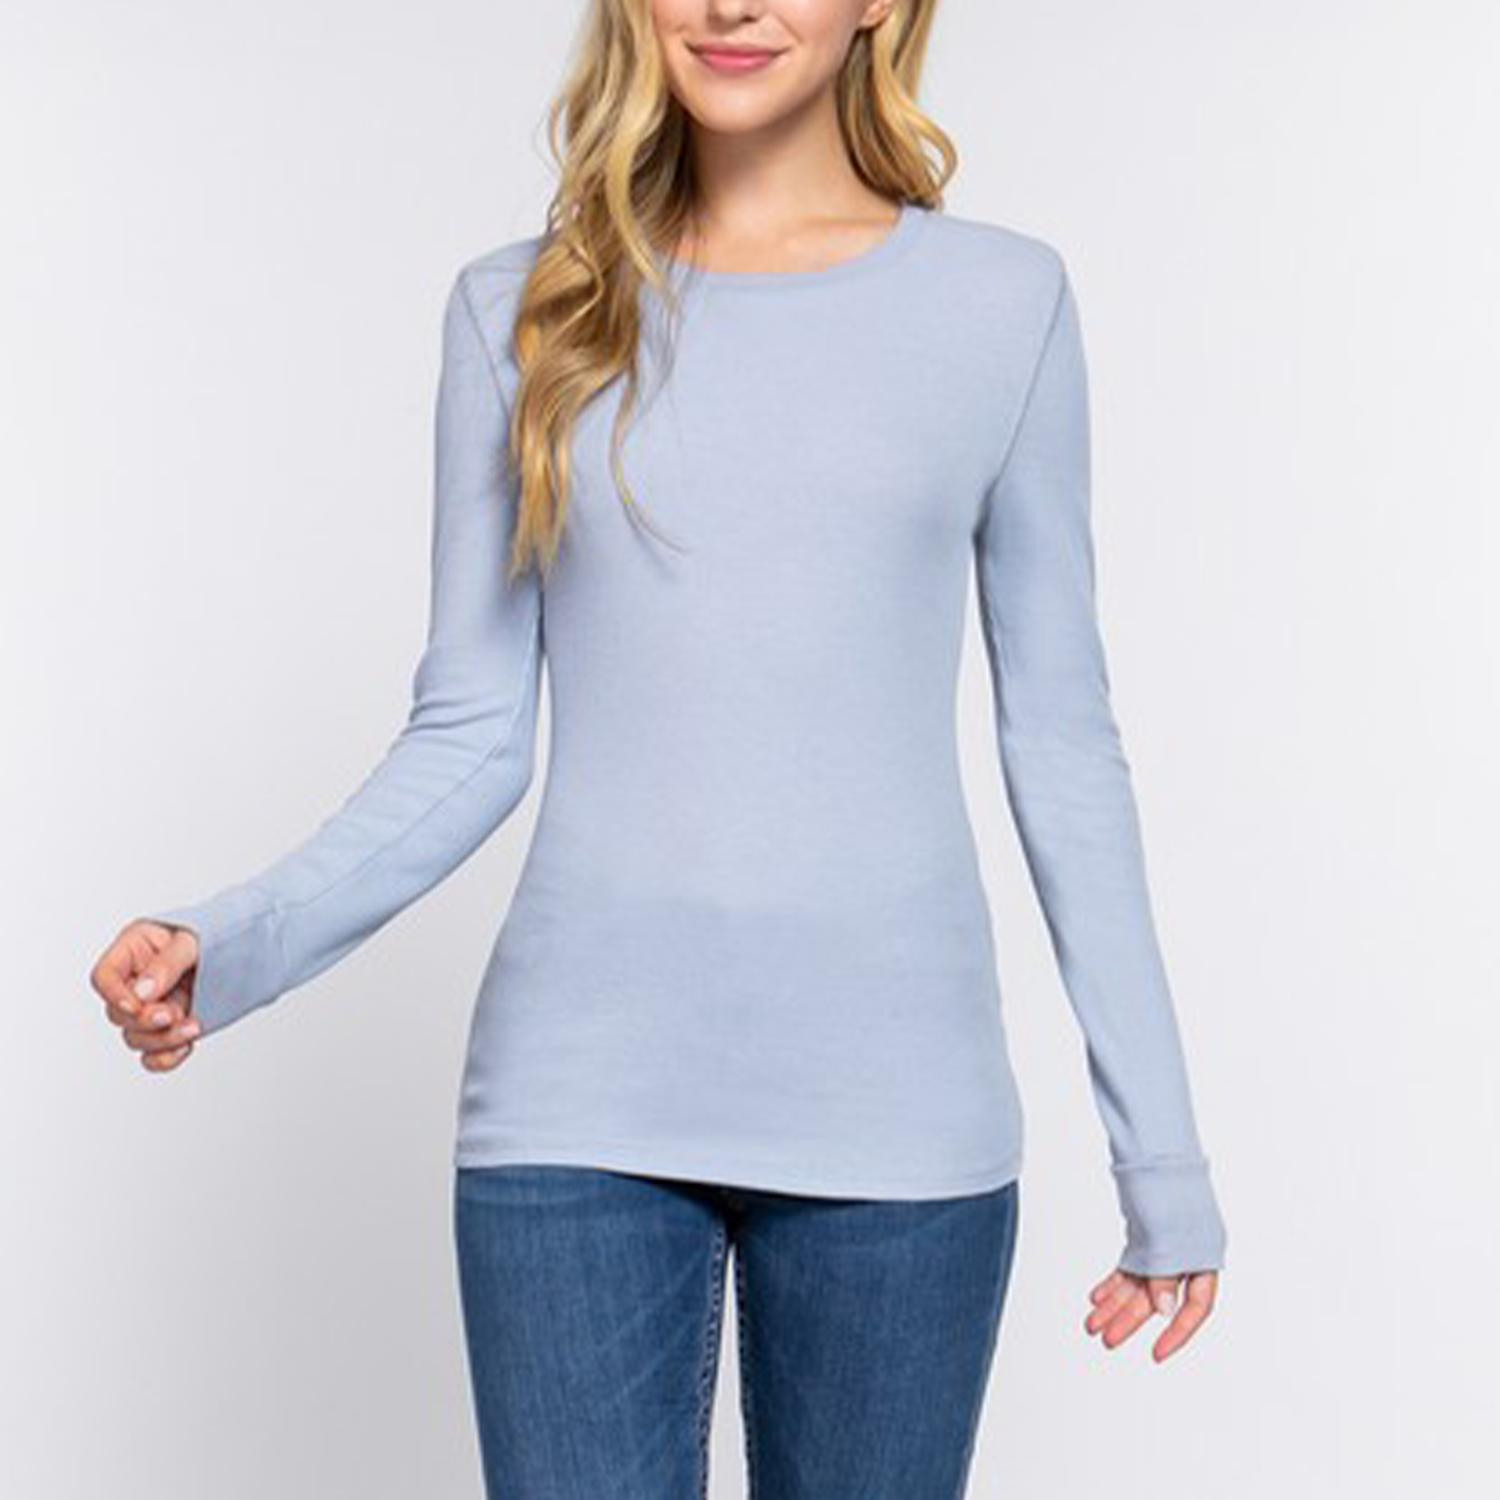 Long Sleeve Crew Thermal Knit Top. Looking for a new season refresh? This long sleeve top is the perfect option for cooler days. Offering more coverage without compromising on style, this top hugs your curves in all the right places, and we're obsessed